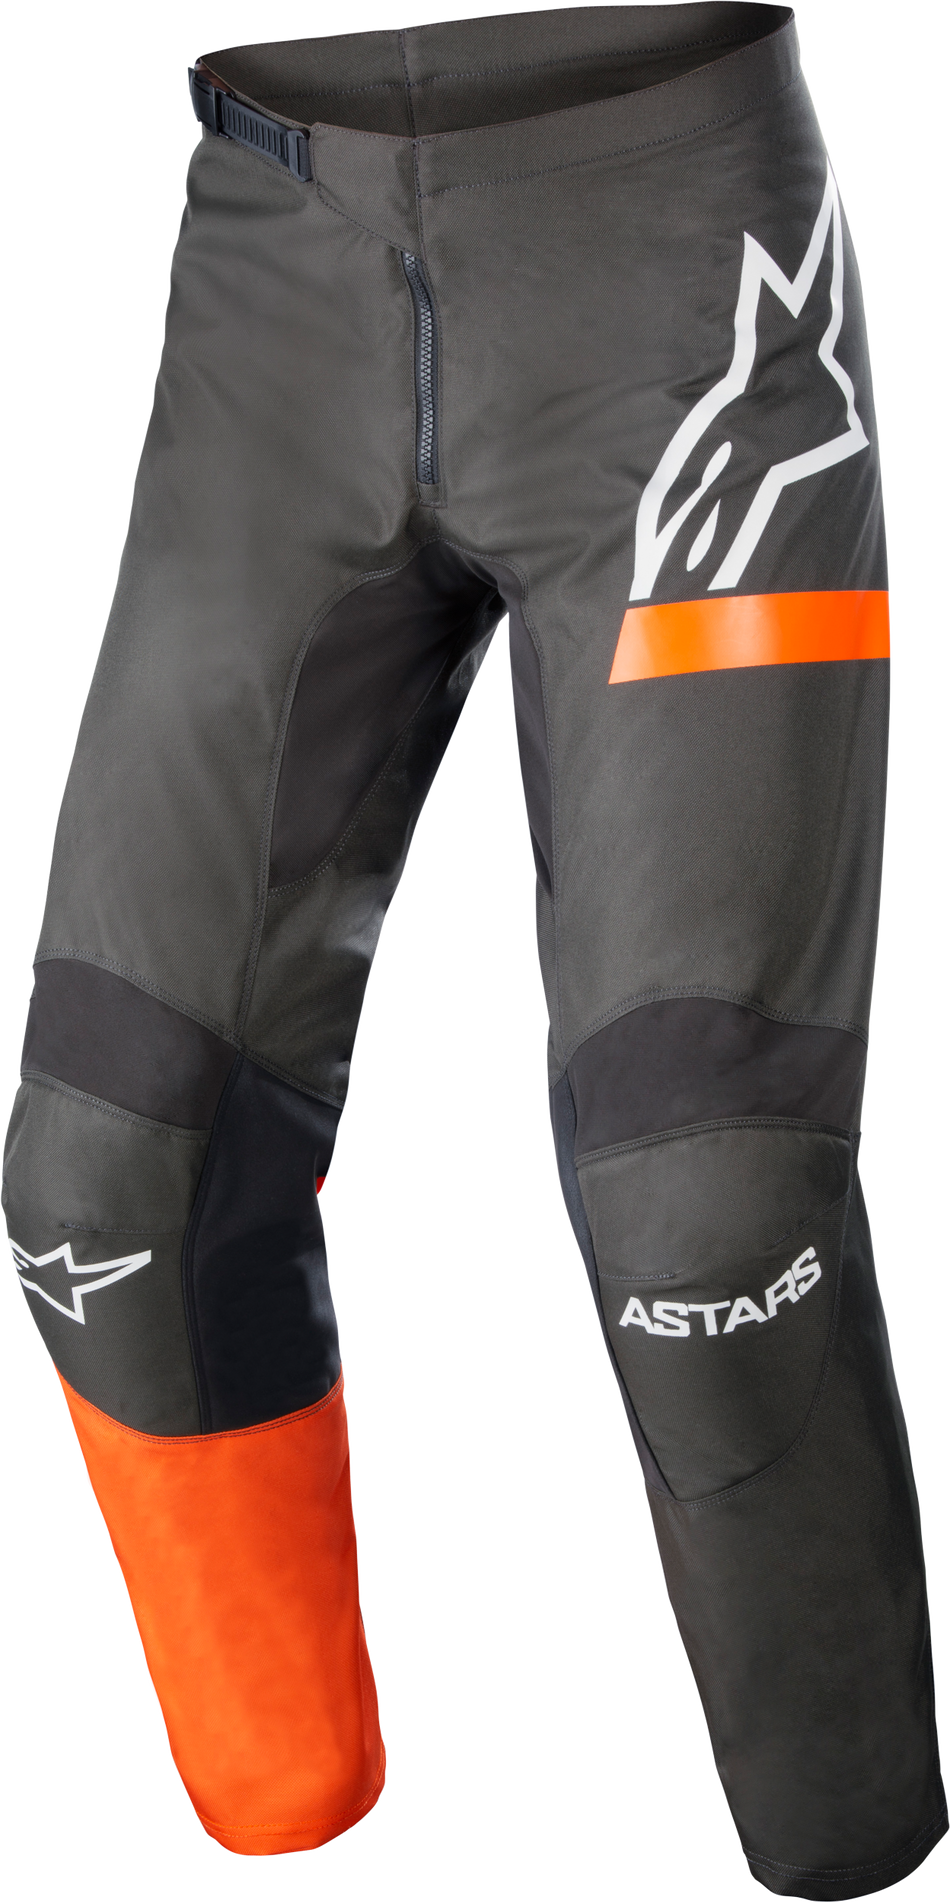 ALPINESTARS Fluid Chaser Pants Anthracite/Coral Fluo Sz 38 3722422-1794-38